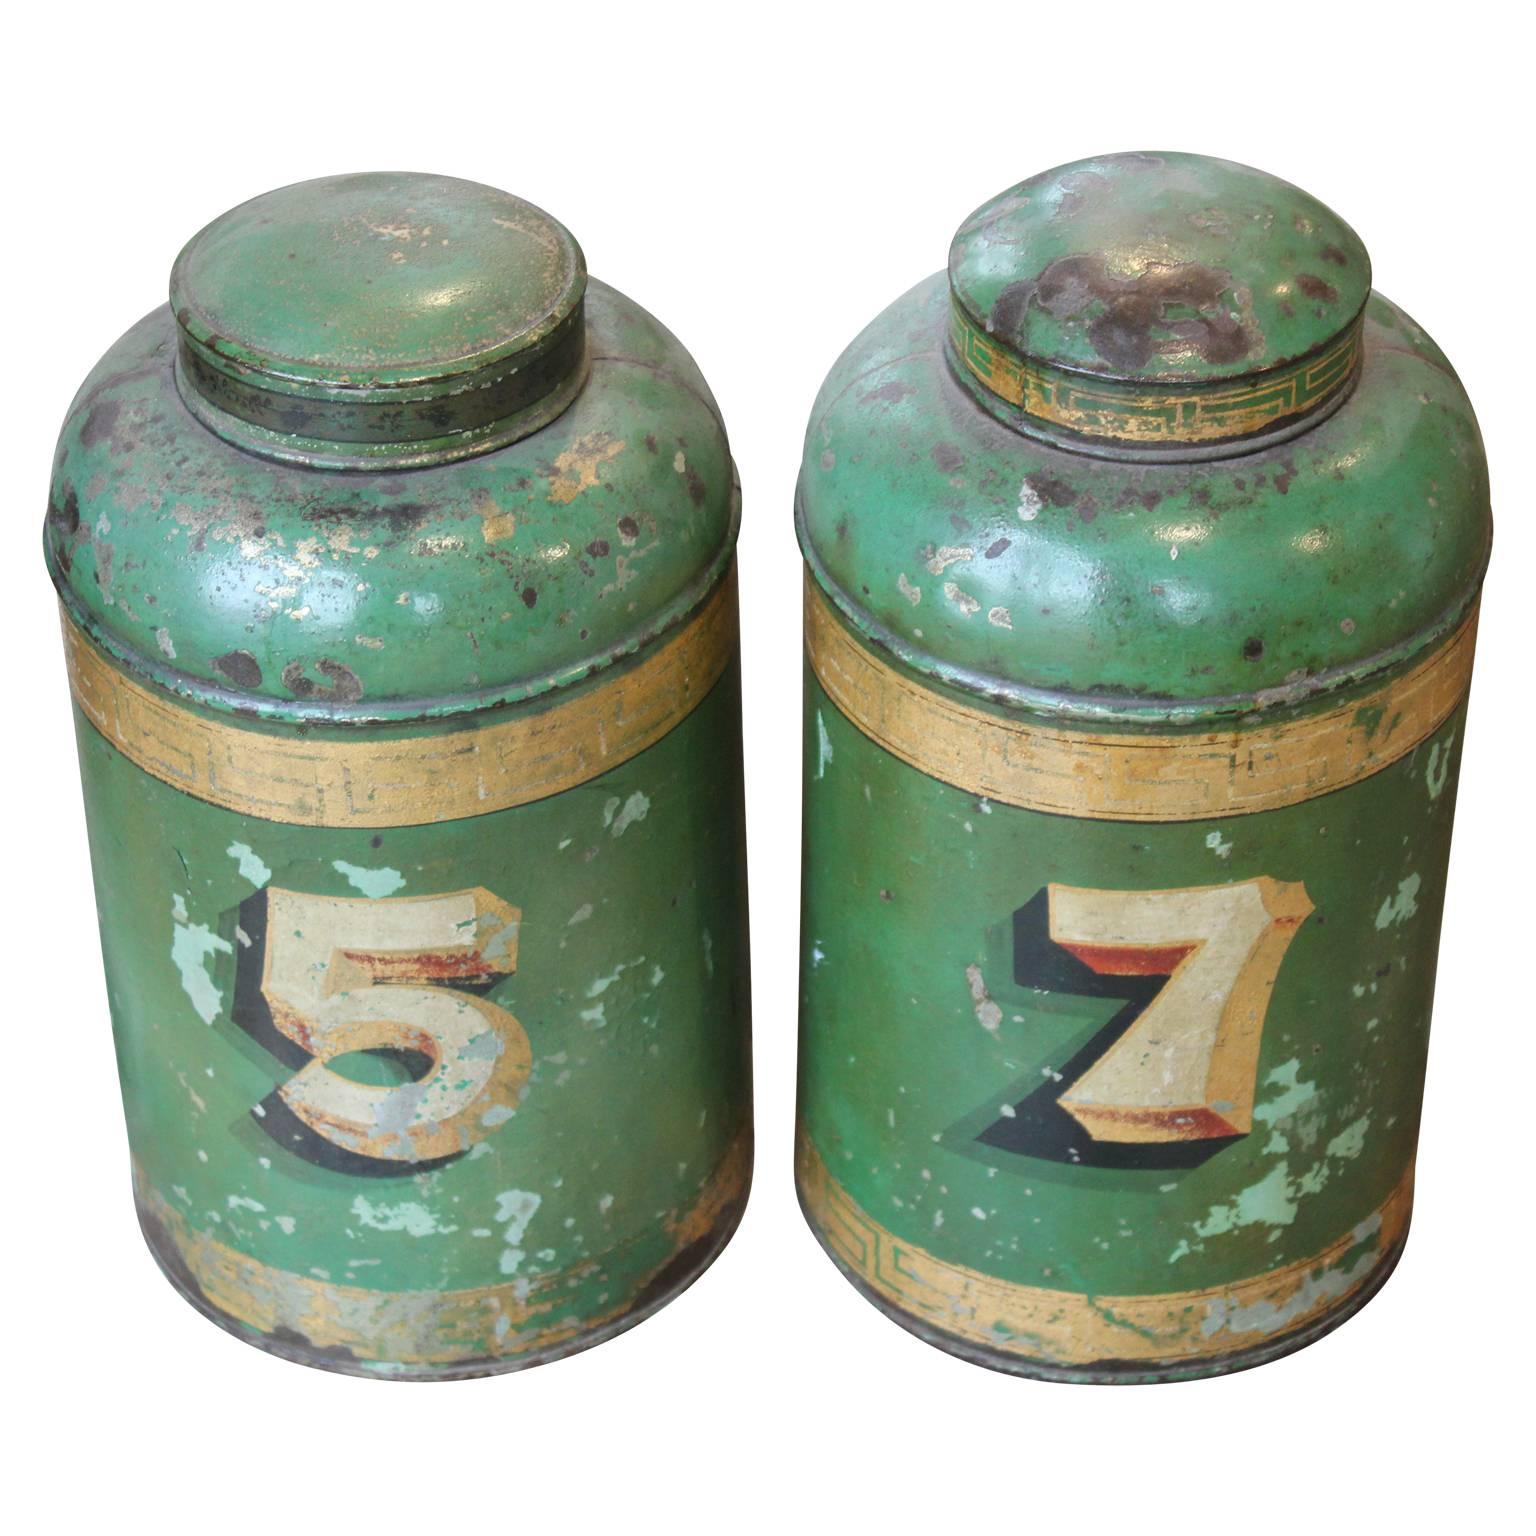 Wonderful distressed pair of English Green Tin Tole Tea Canisters. Perfect decorative objects to finish off the perfect room. 